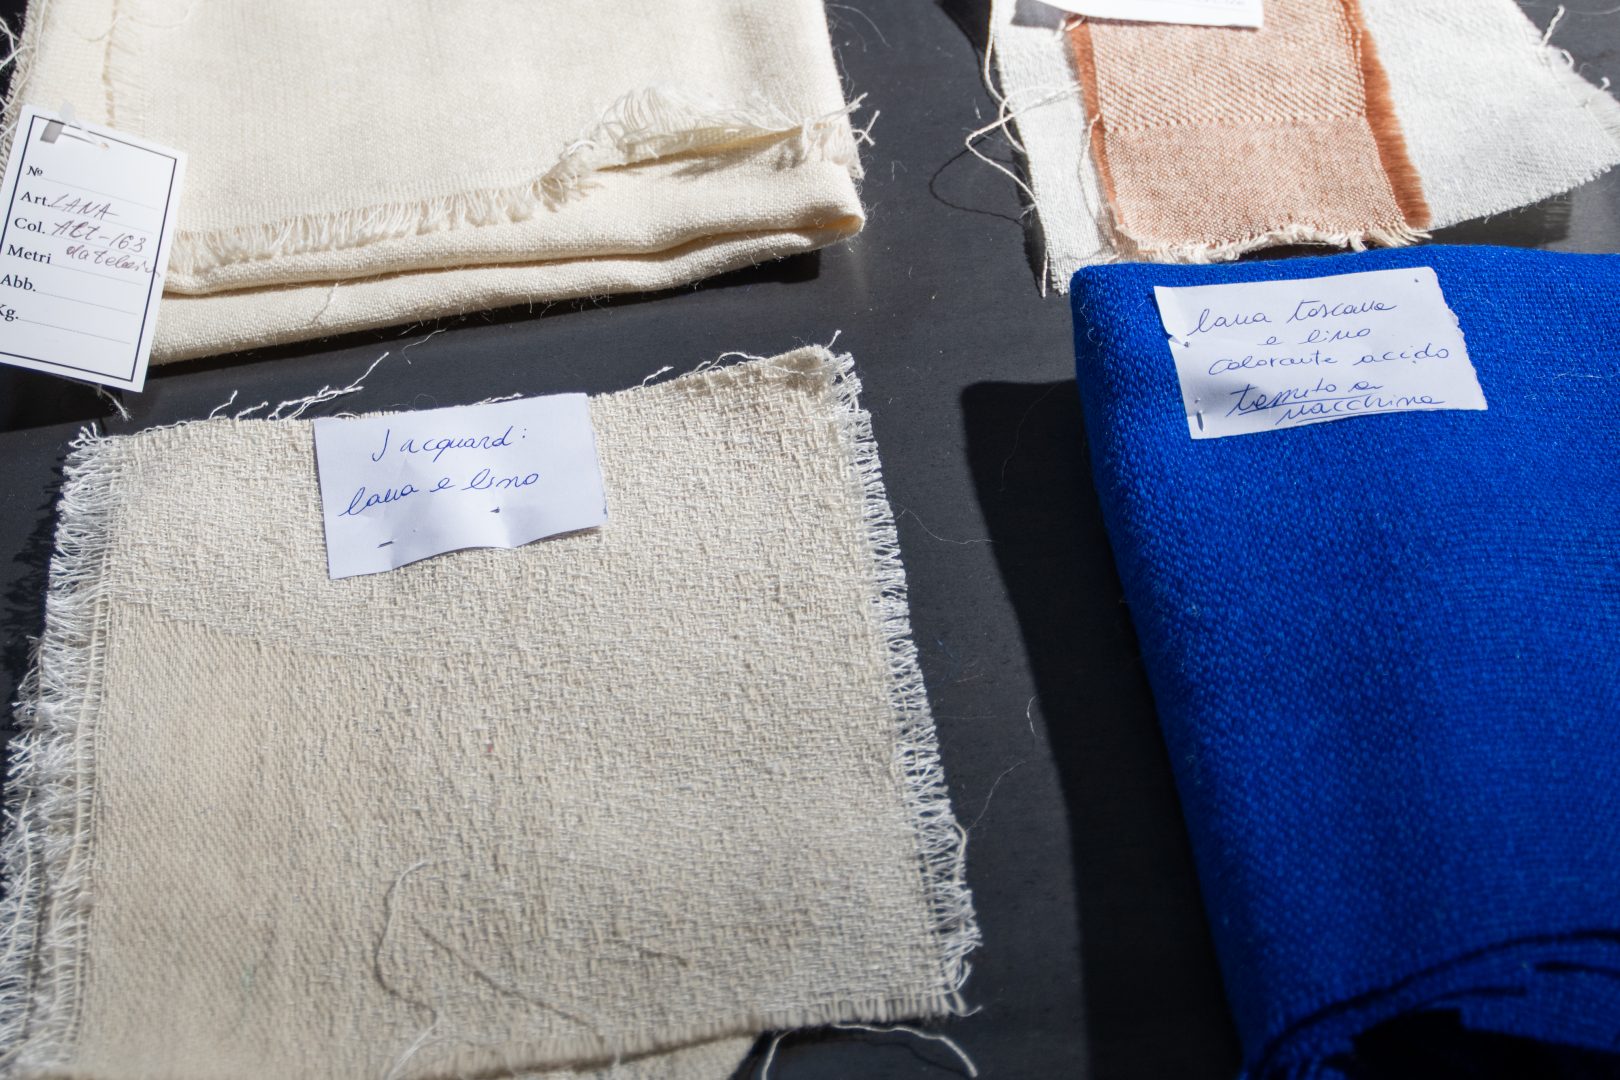 Sampling of different quality fabrics of natural fiber composition which are woven on dobby looms by manufacturers in the district’s area. Photo: Rachele Salvioli